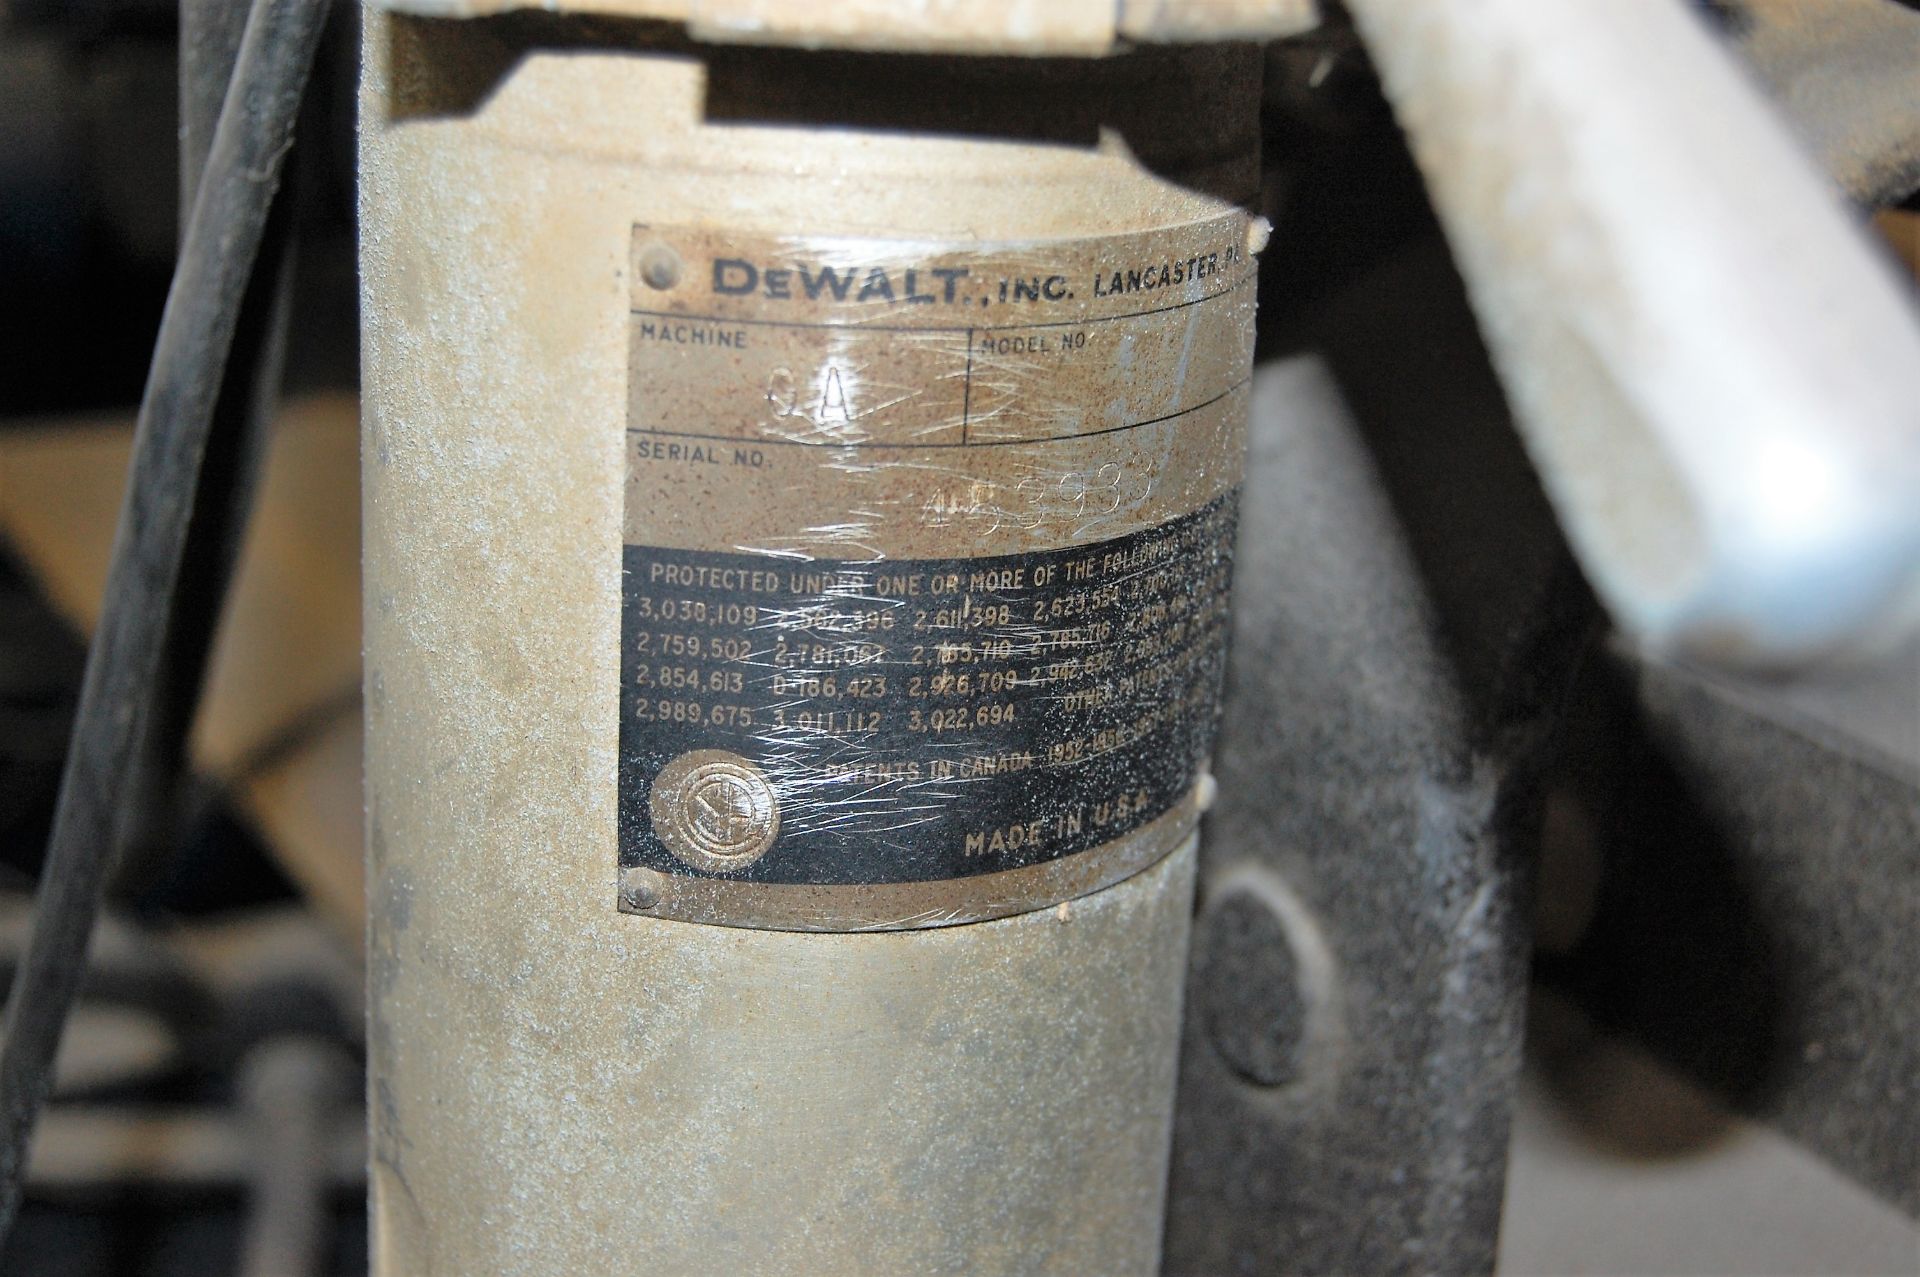 DeWALT MDL. GA 3HP 26" RIP SAW, S/N: 53933 [LOCATED IN MELVILLE, NY] - Image 6 of 6